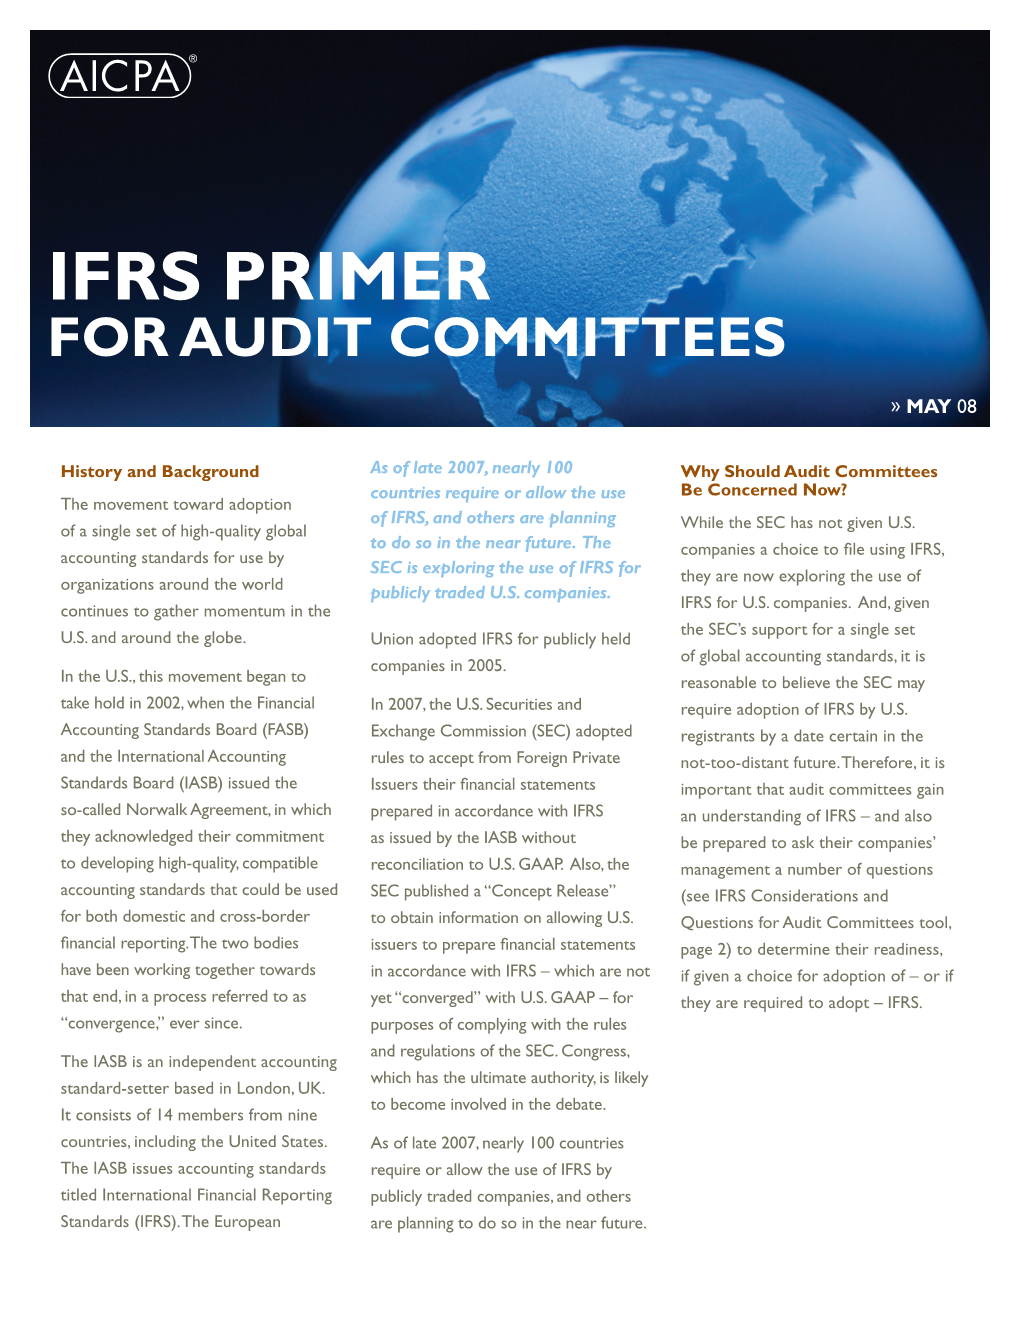 IFRS Primer for Audit Committees